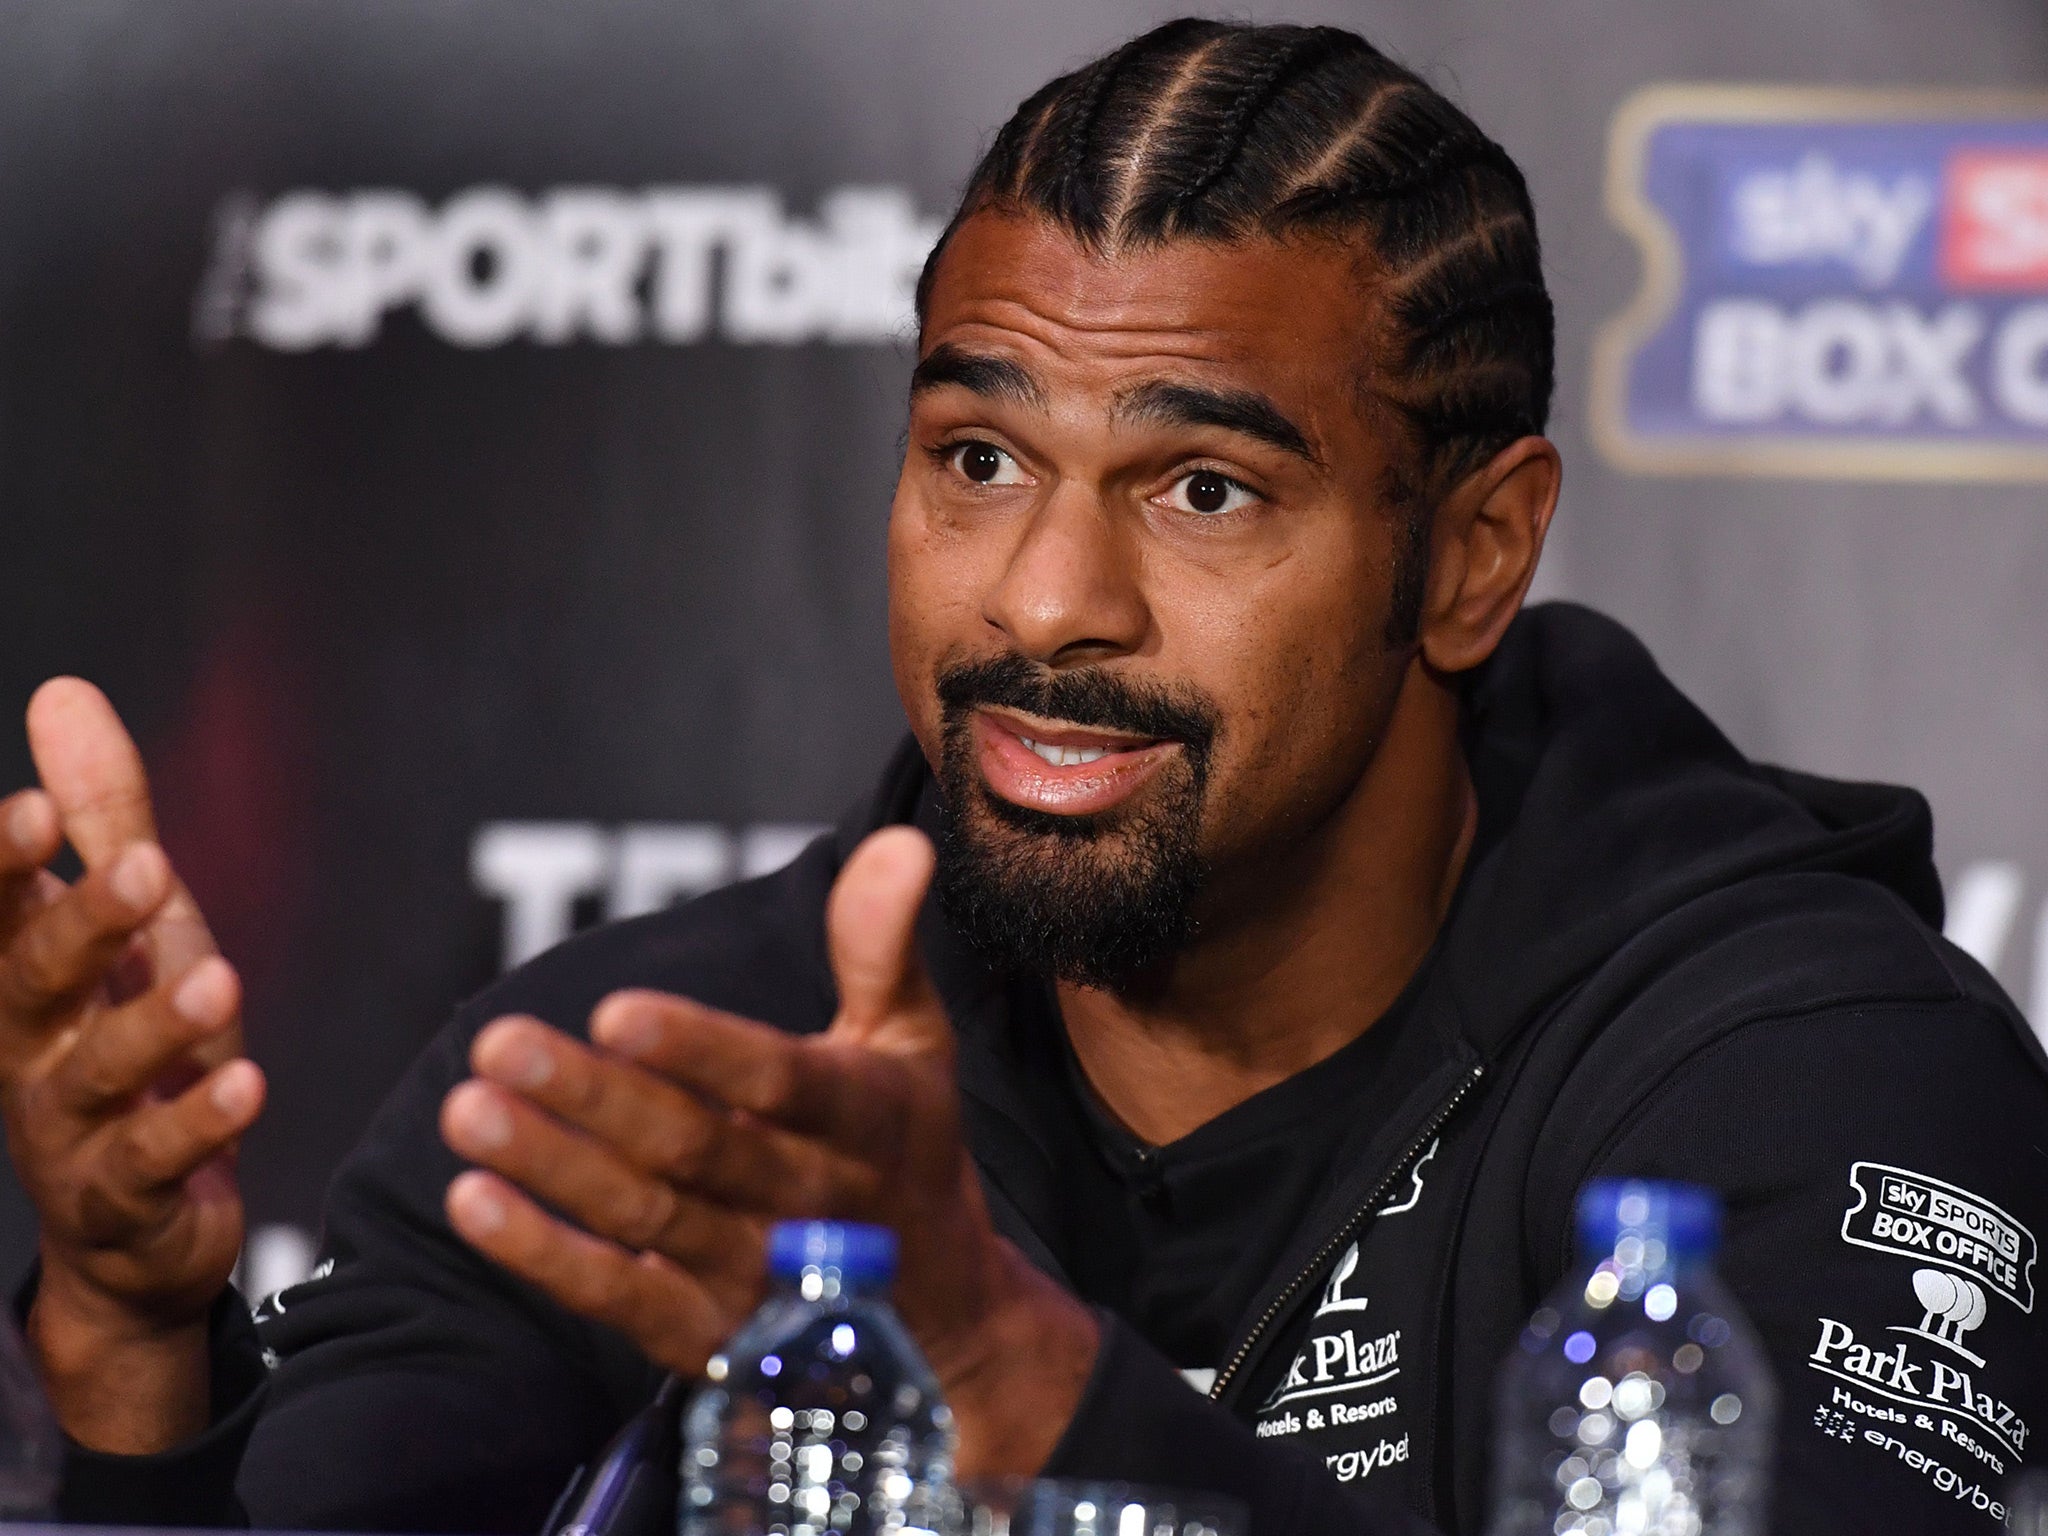 David Haye has been reproached for his unsavoury pre-fight threats